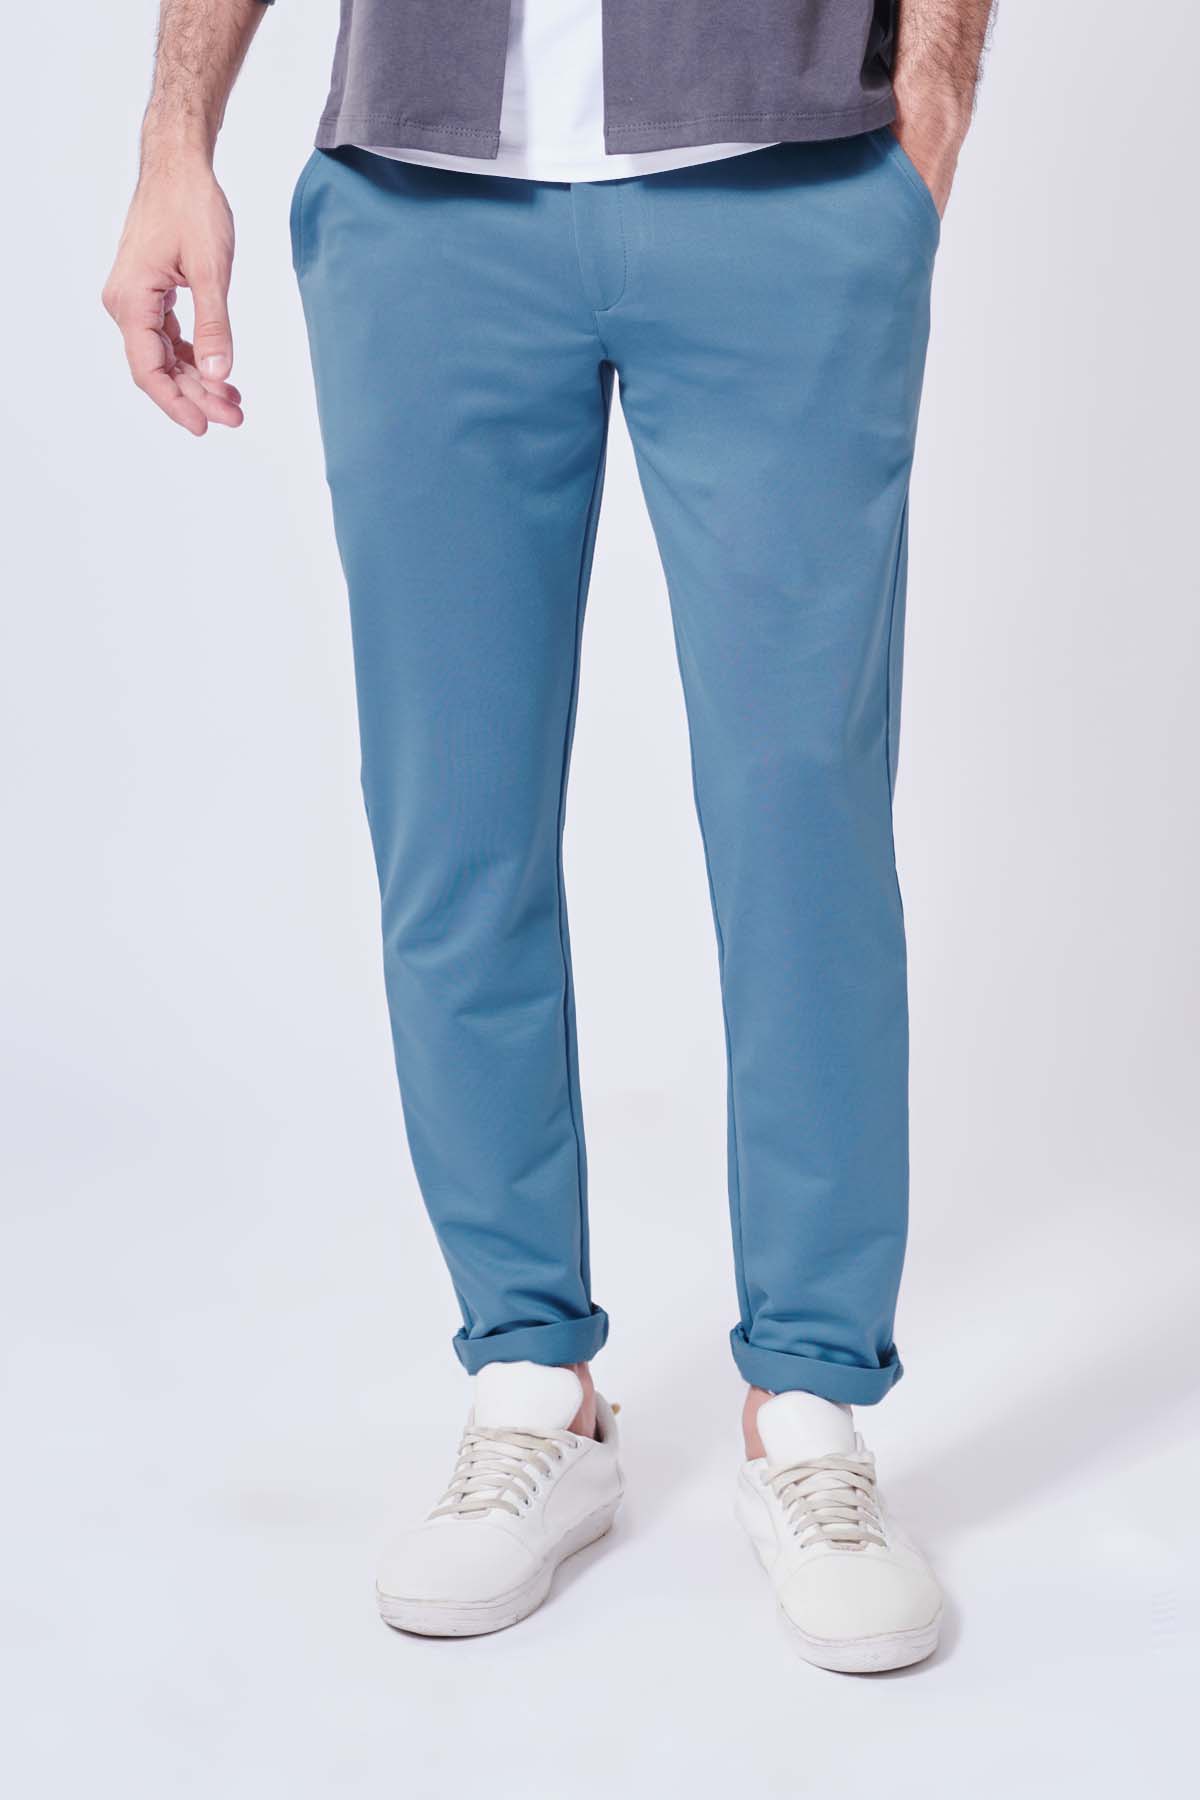 The Bluefin Pant